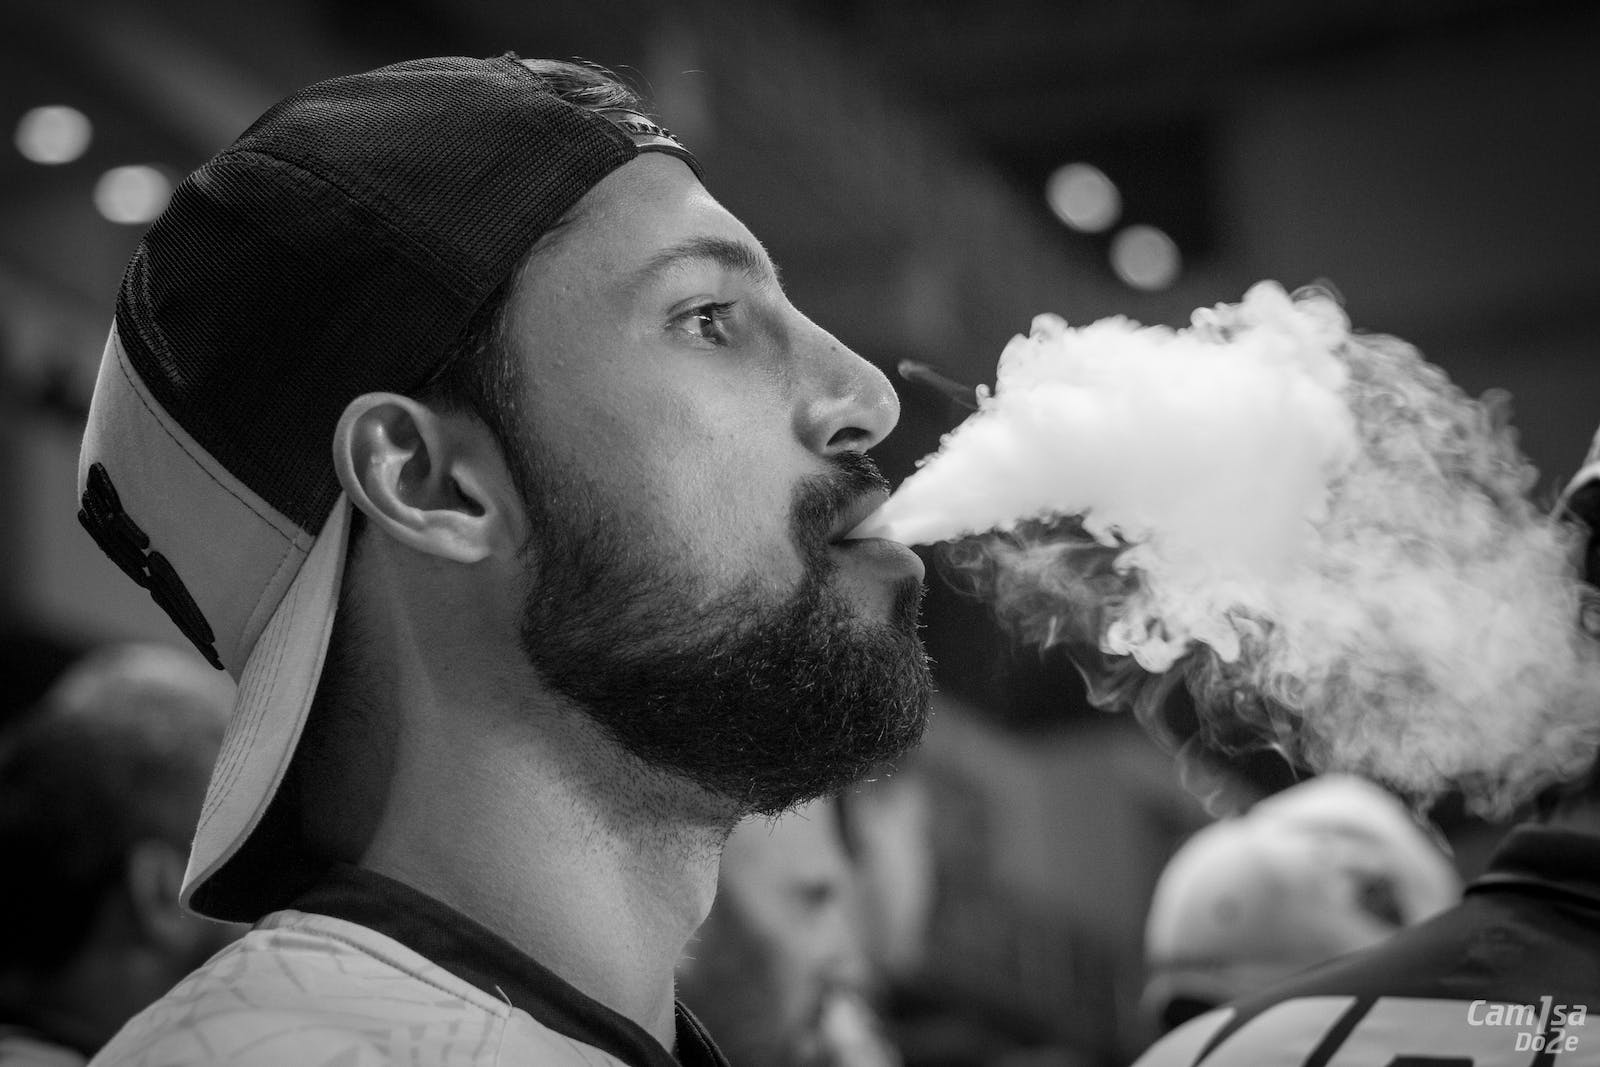 Why Does Vaping Make Me Dizzy? Here’s What They Don’t Tell You